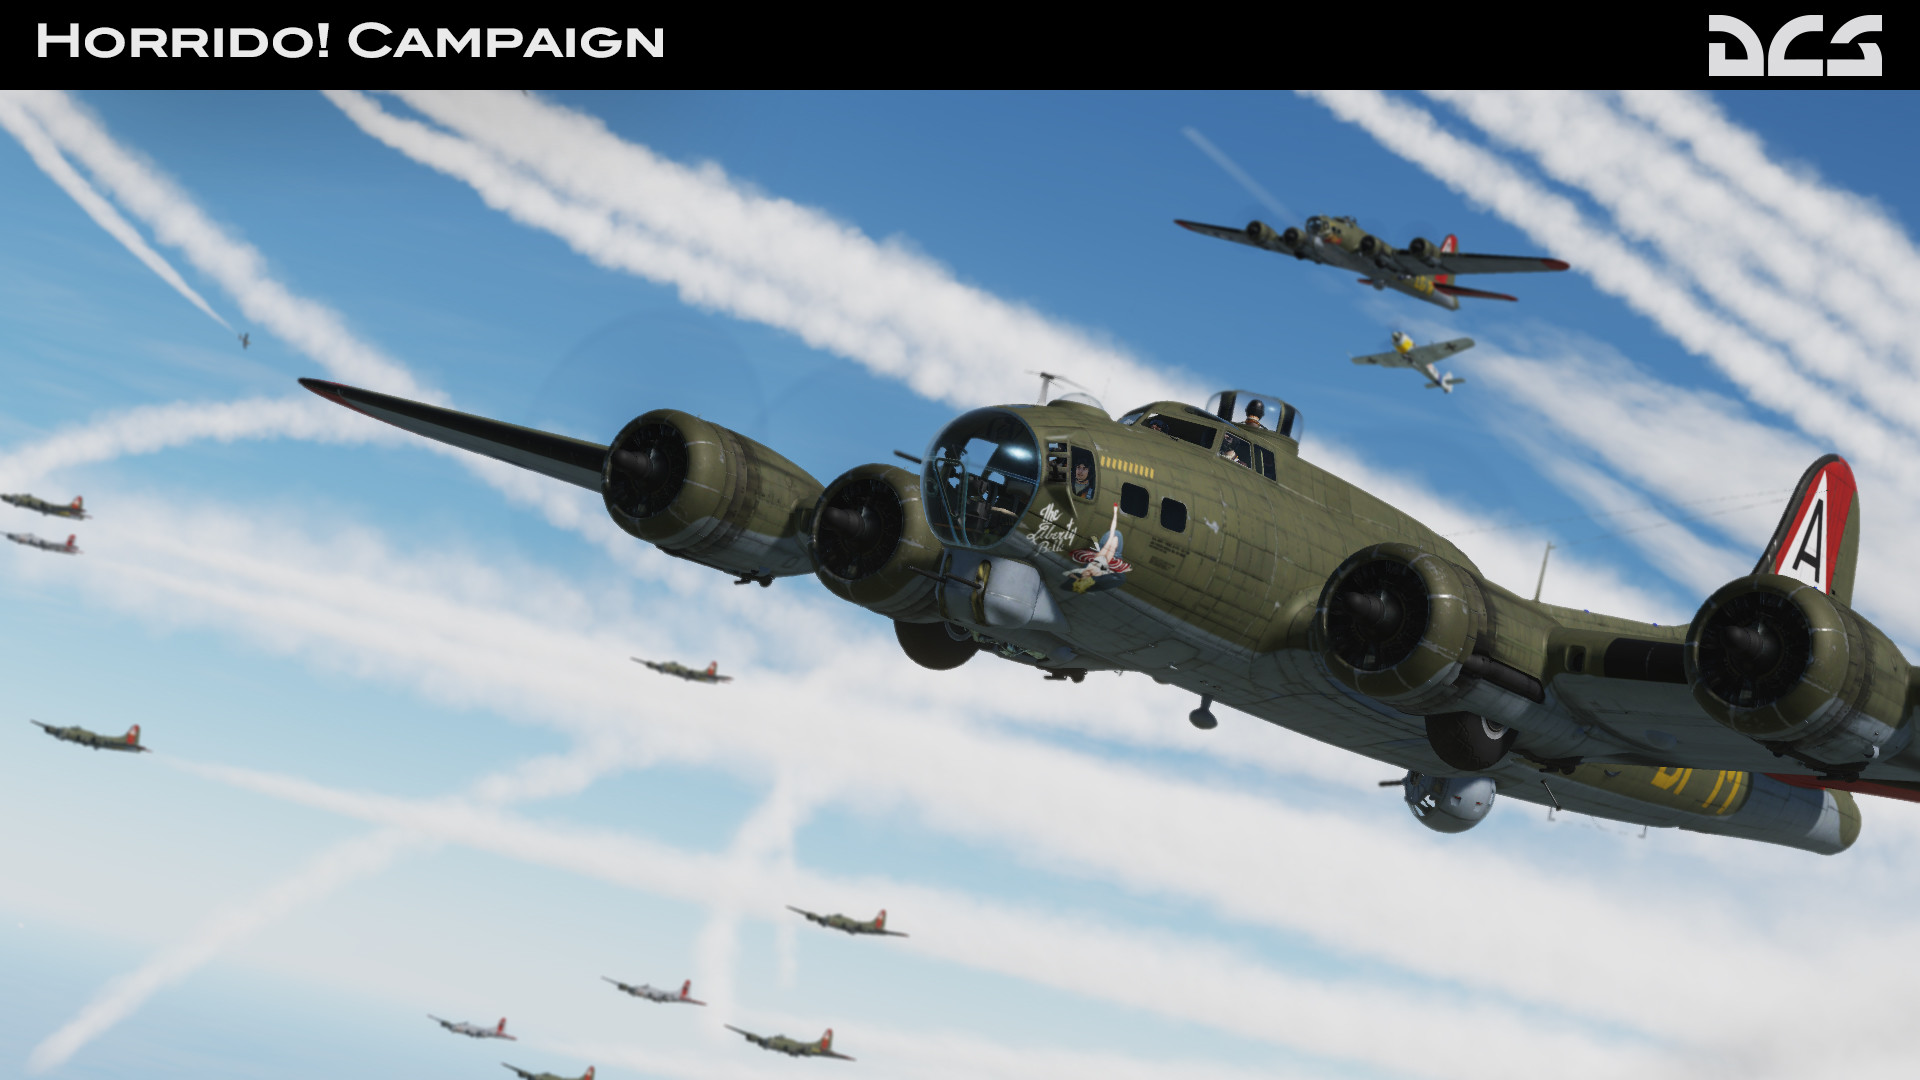 DCS: Fw 190 A-8 Horrido! Steam Campaign on